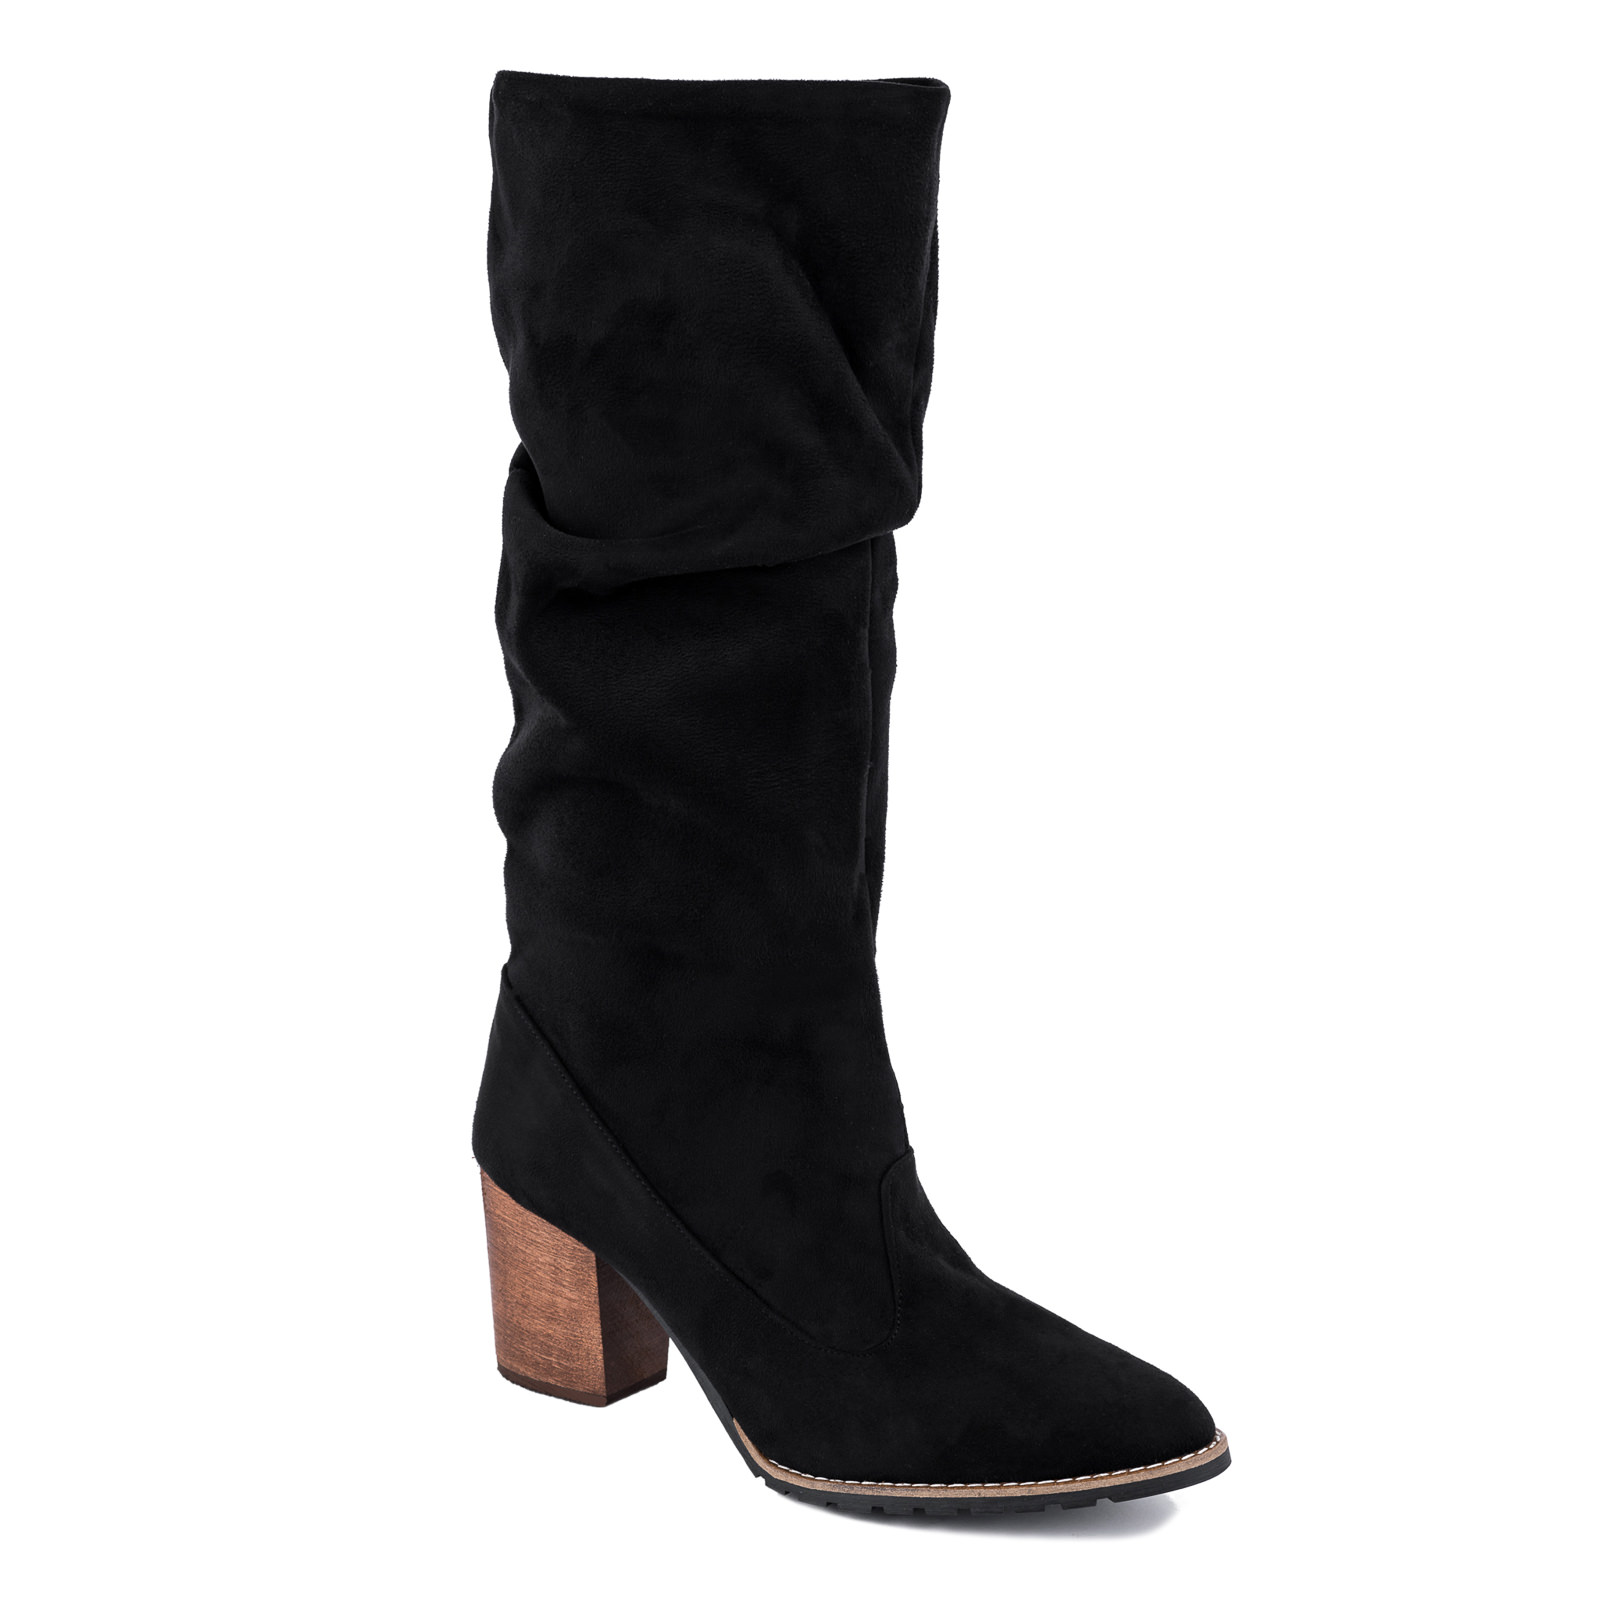 VELOUR WRINKLED ANKLE BOOTS WITH BLOCK HEEL - BLACK